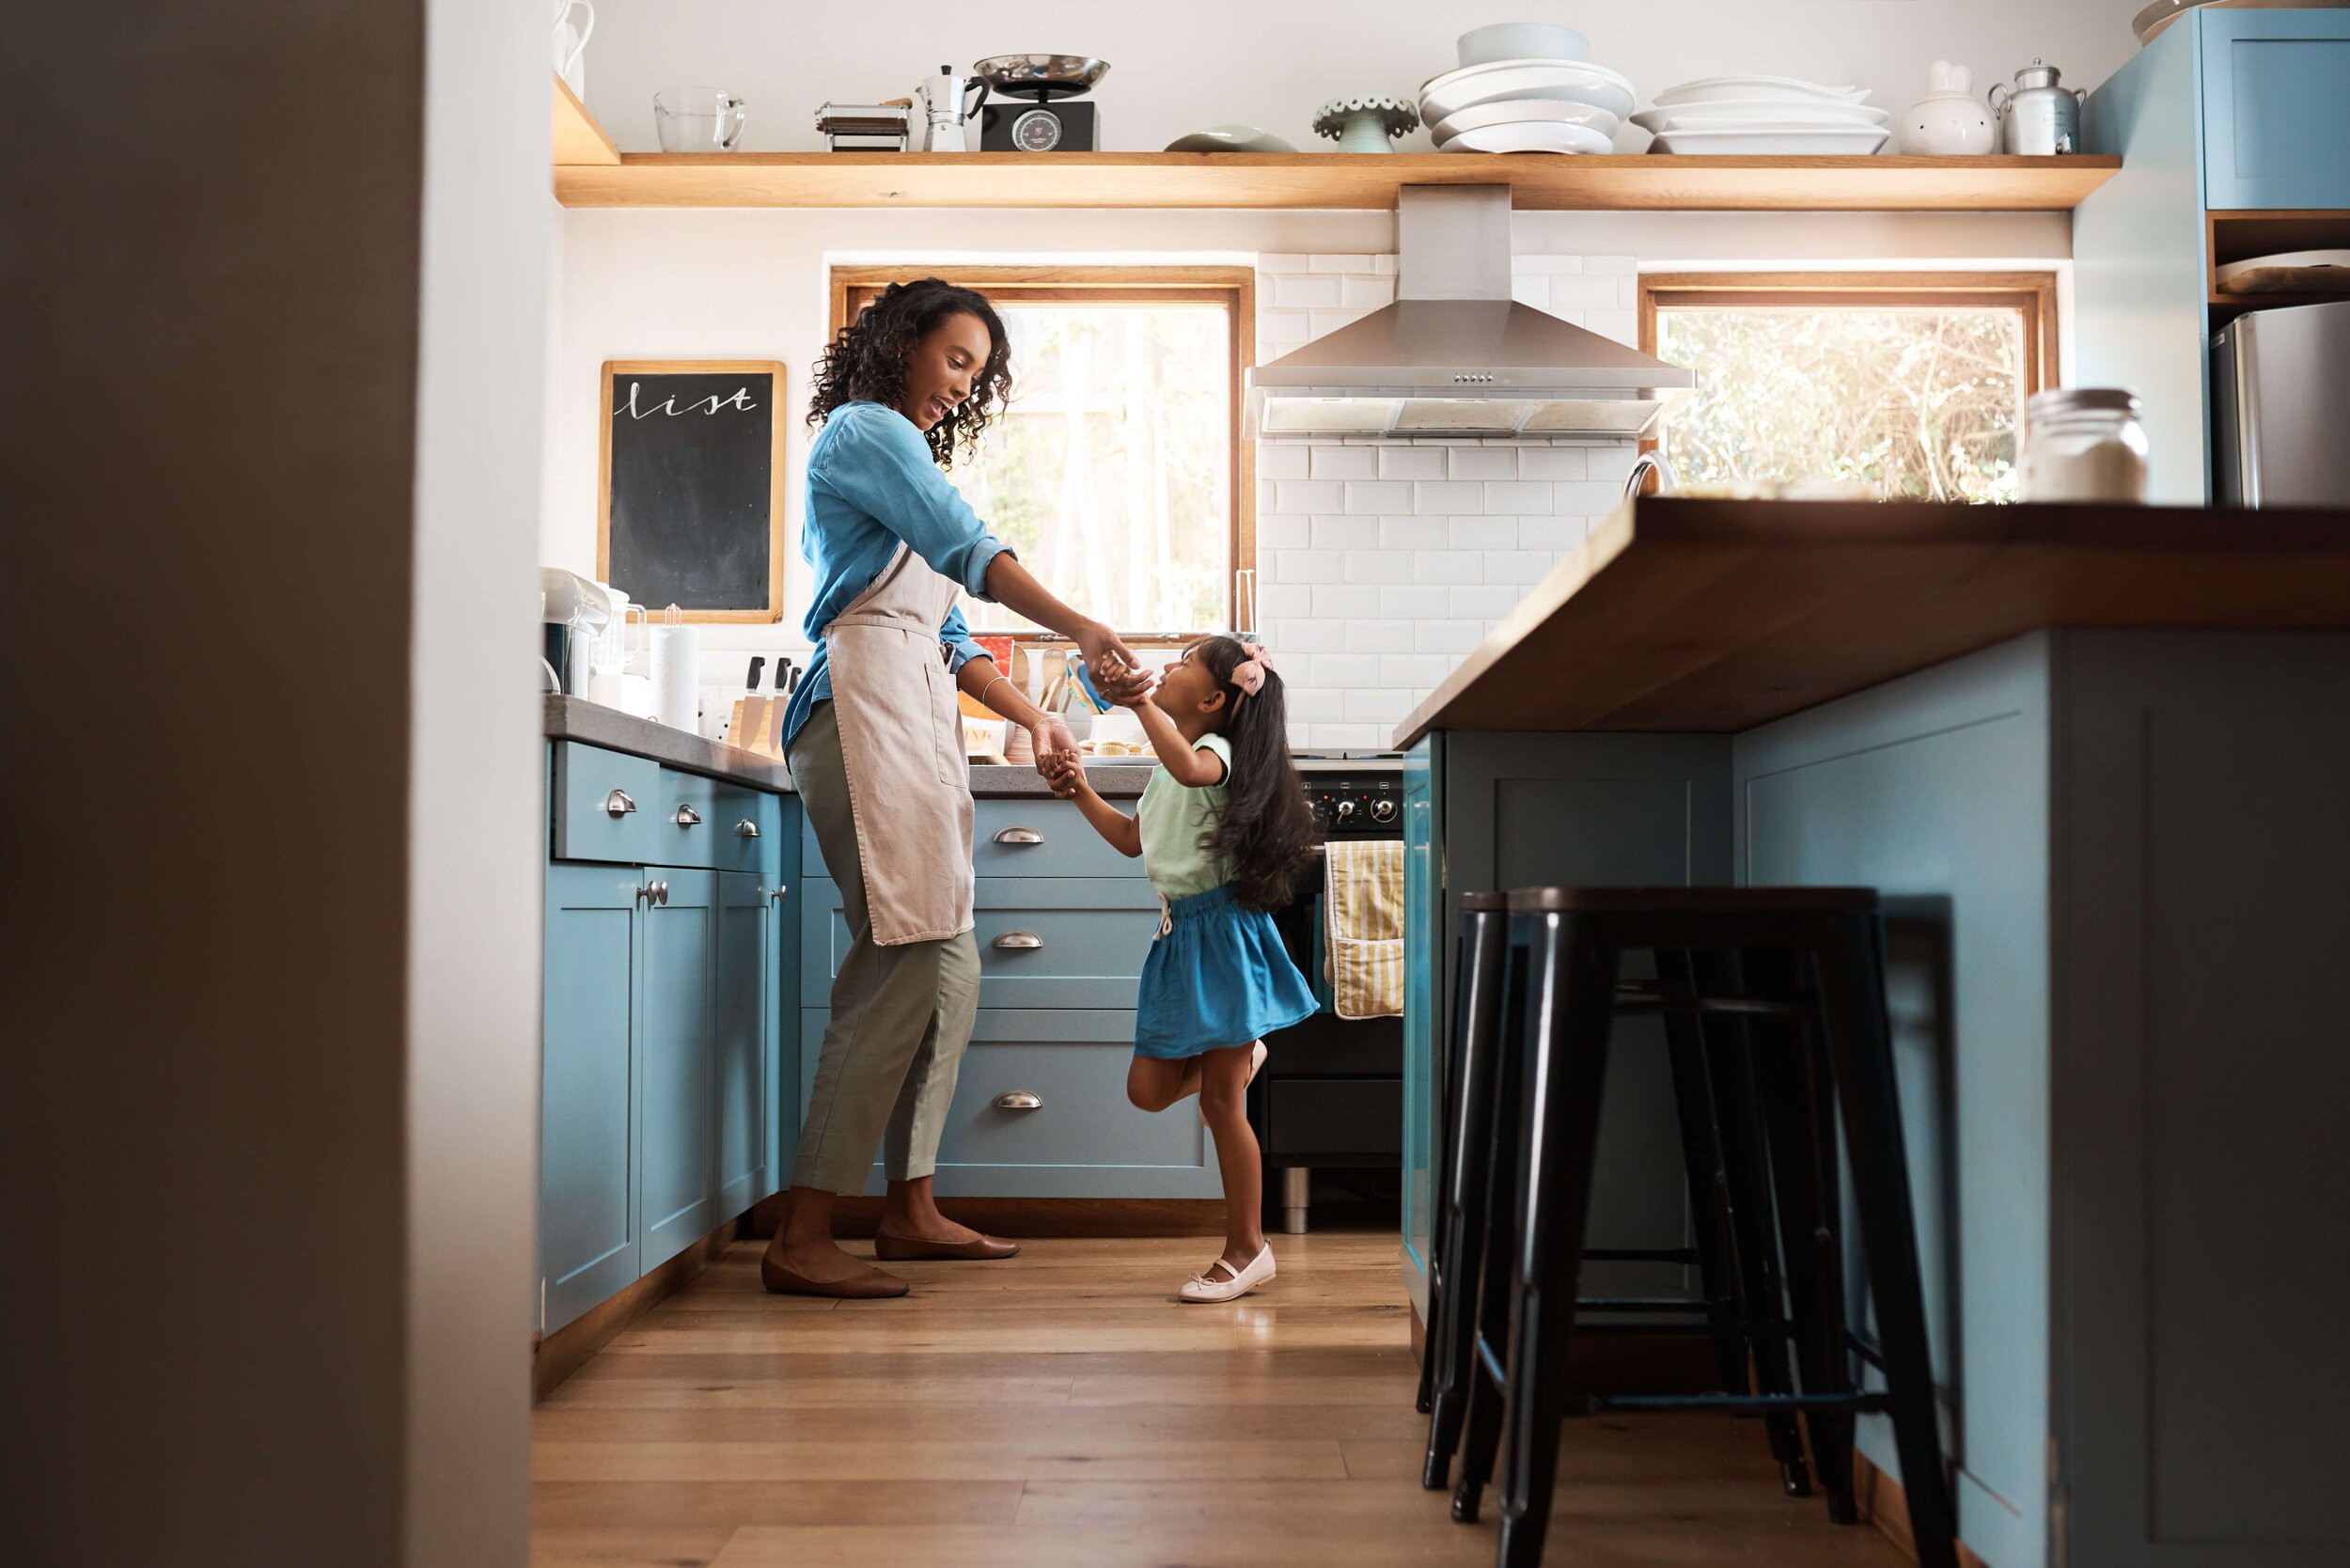 mother and daughter dancing in home kitchen